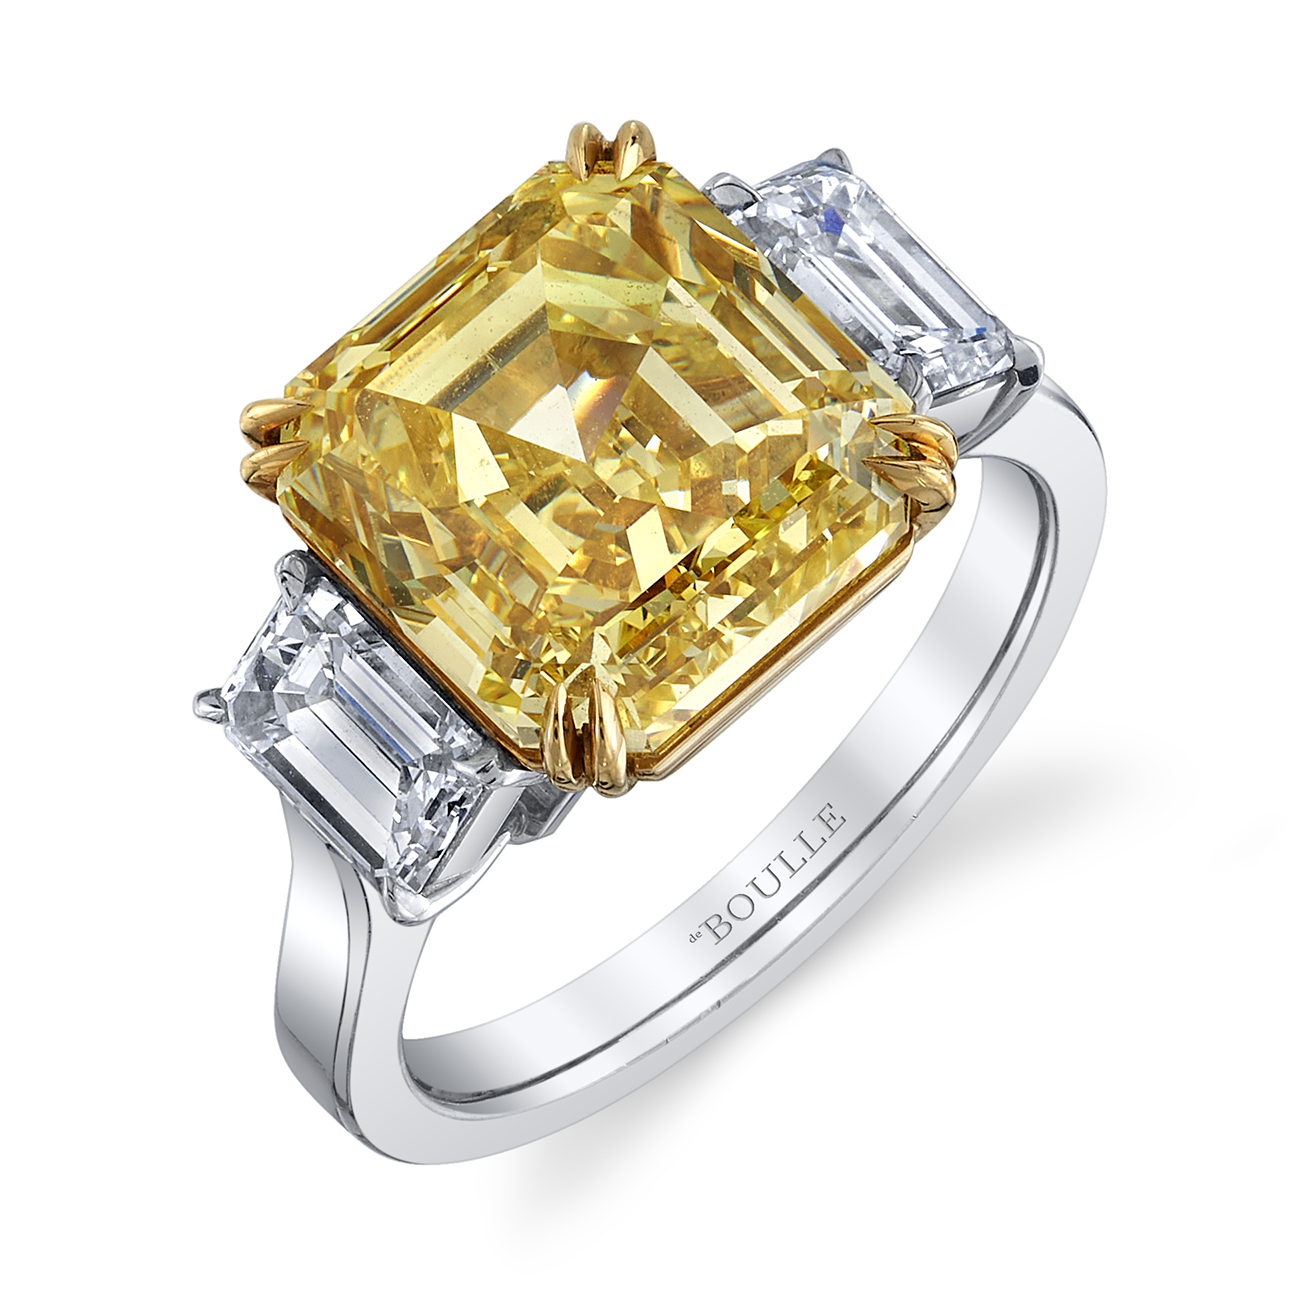 Luxury Fine Jewelers in Dallas, TX and Houston, TX